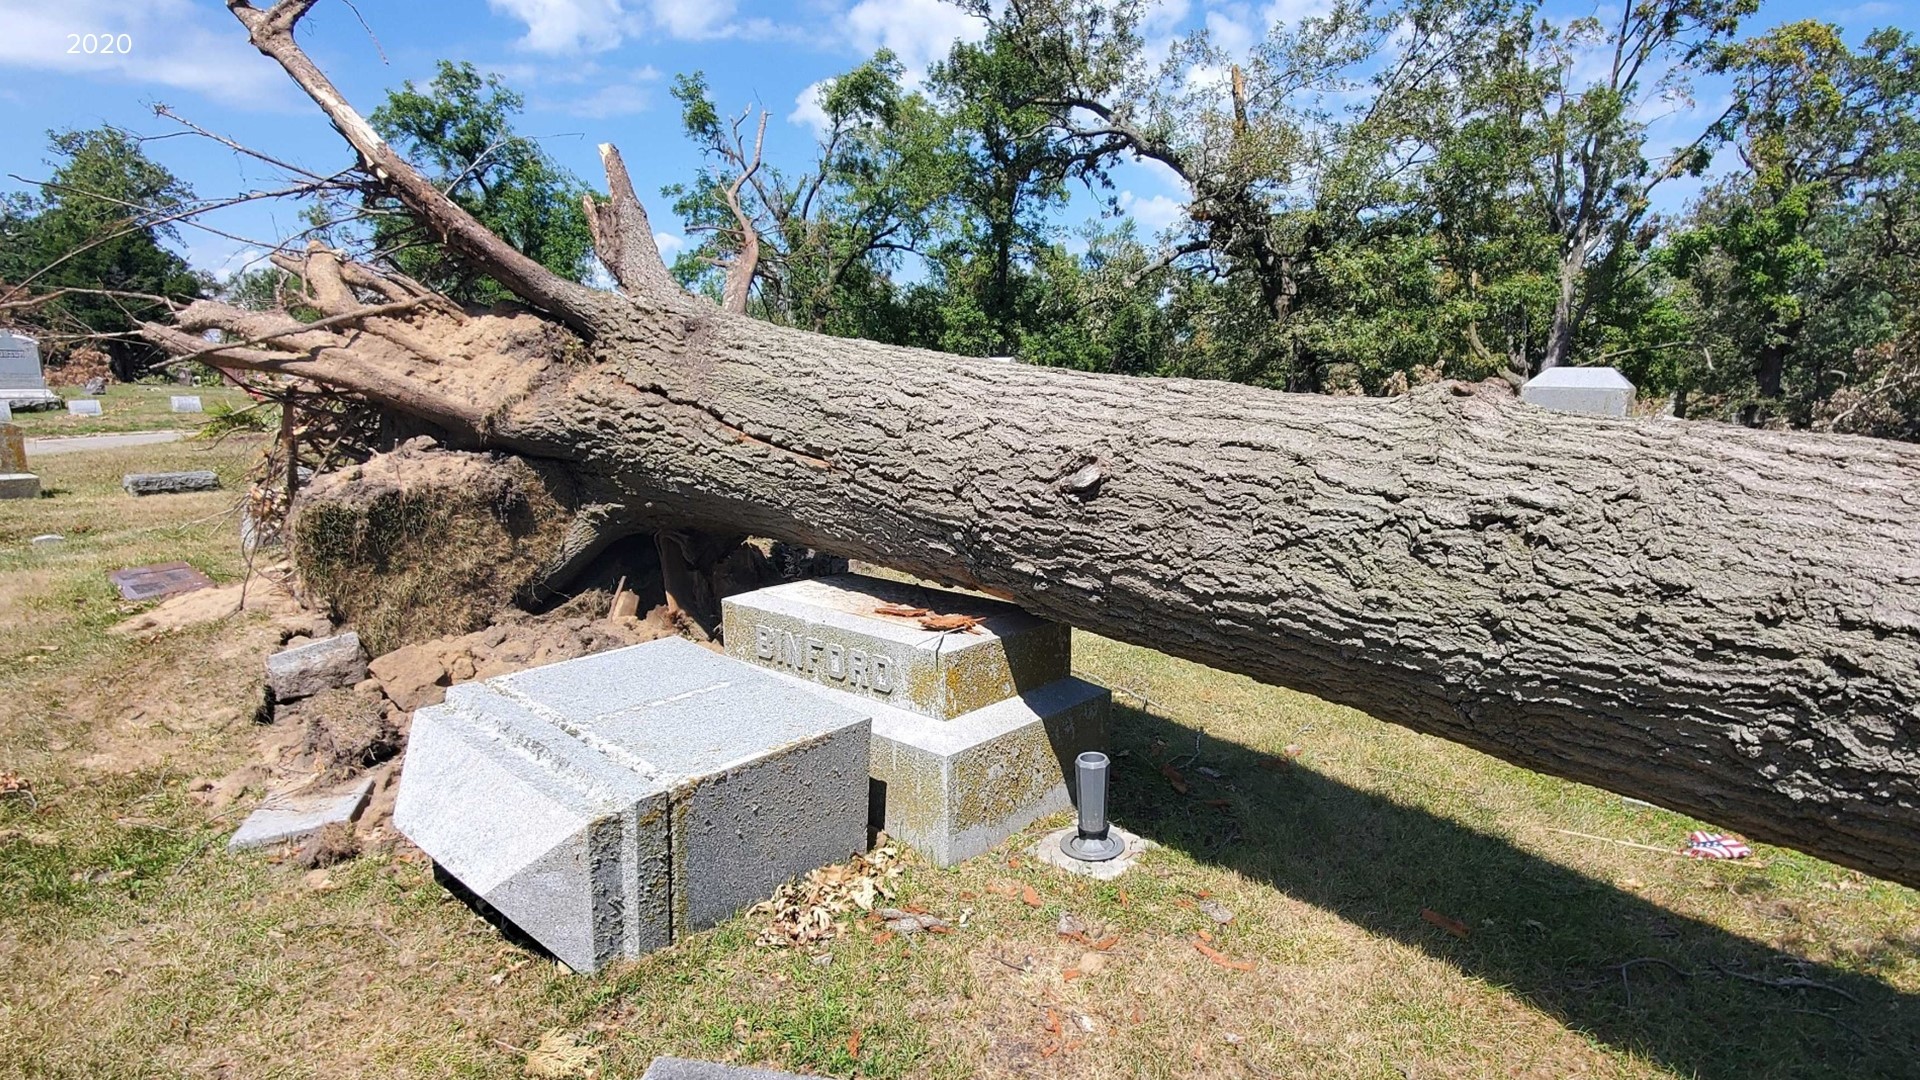 By the time the Aug. 10, 2020 derecho finally passed, Riverside Cemetery in Marshalltown and its grounds were destroyed.